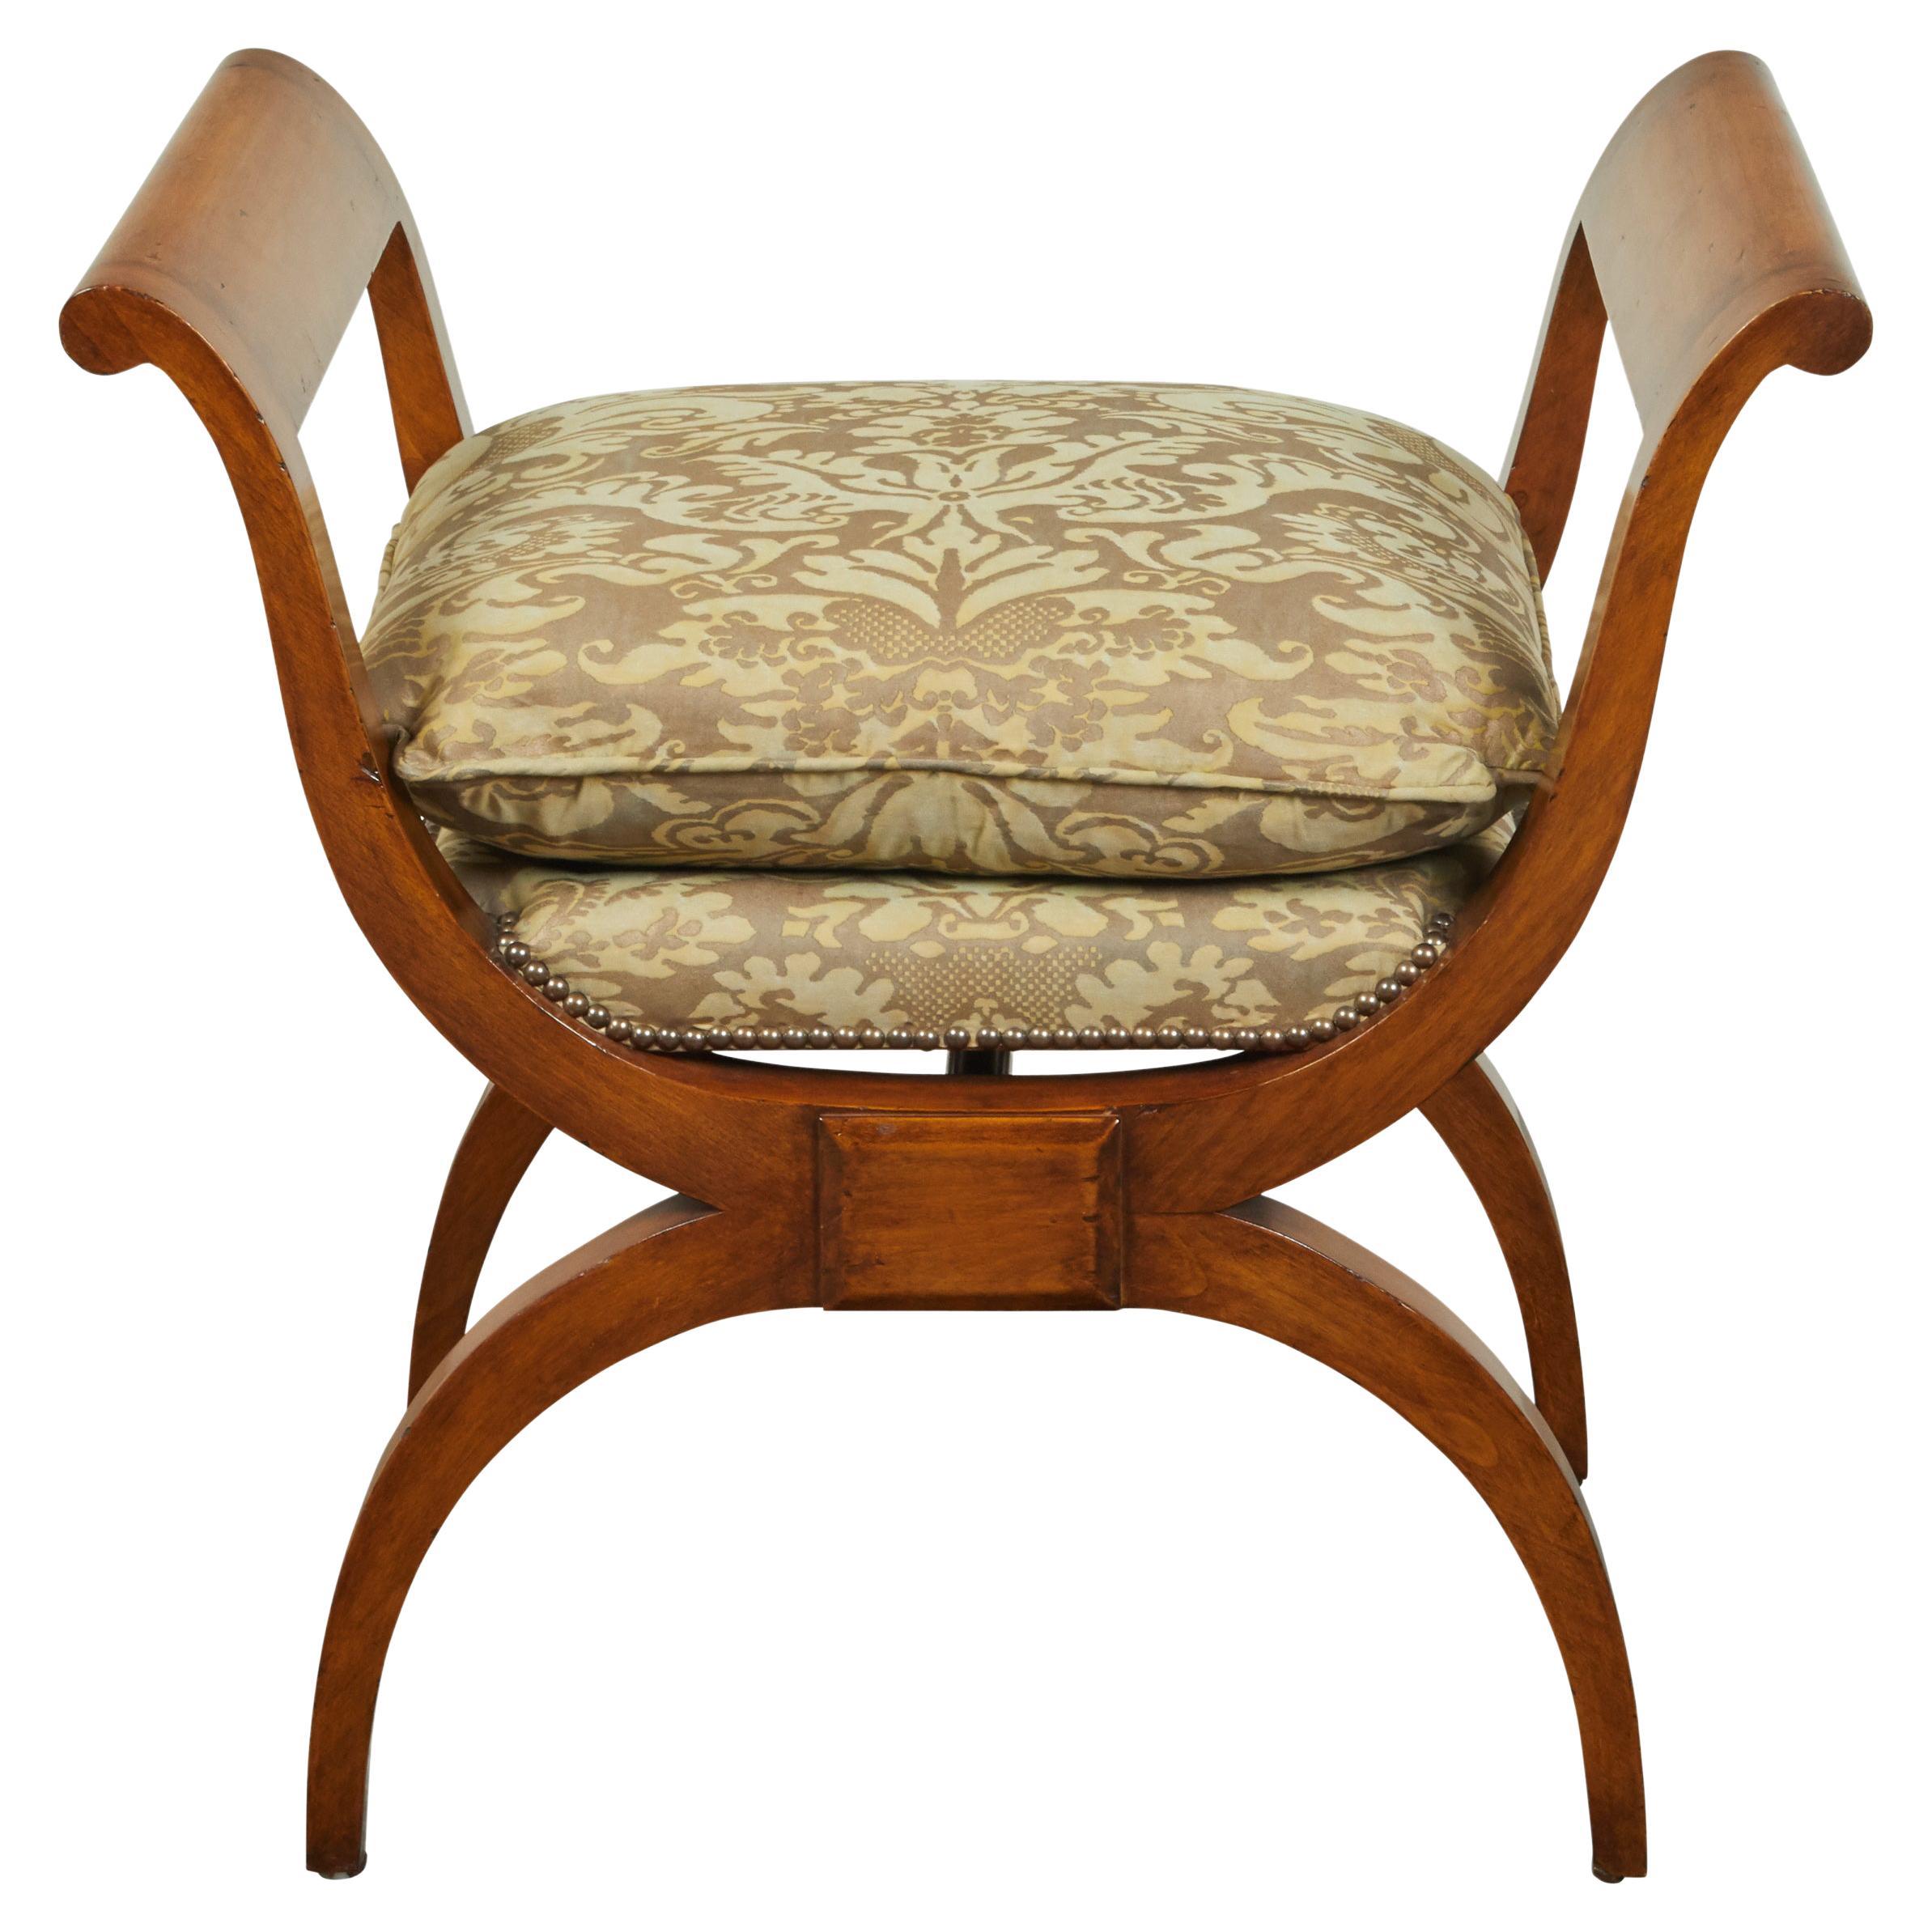 19th Century Biedermeier X-Form Stool with Out-Scrolling Arms and Cushion